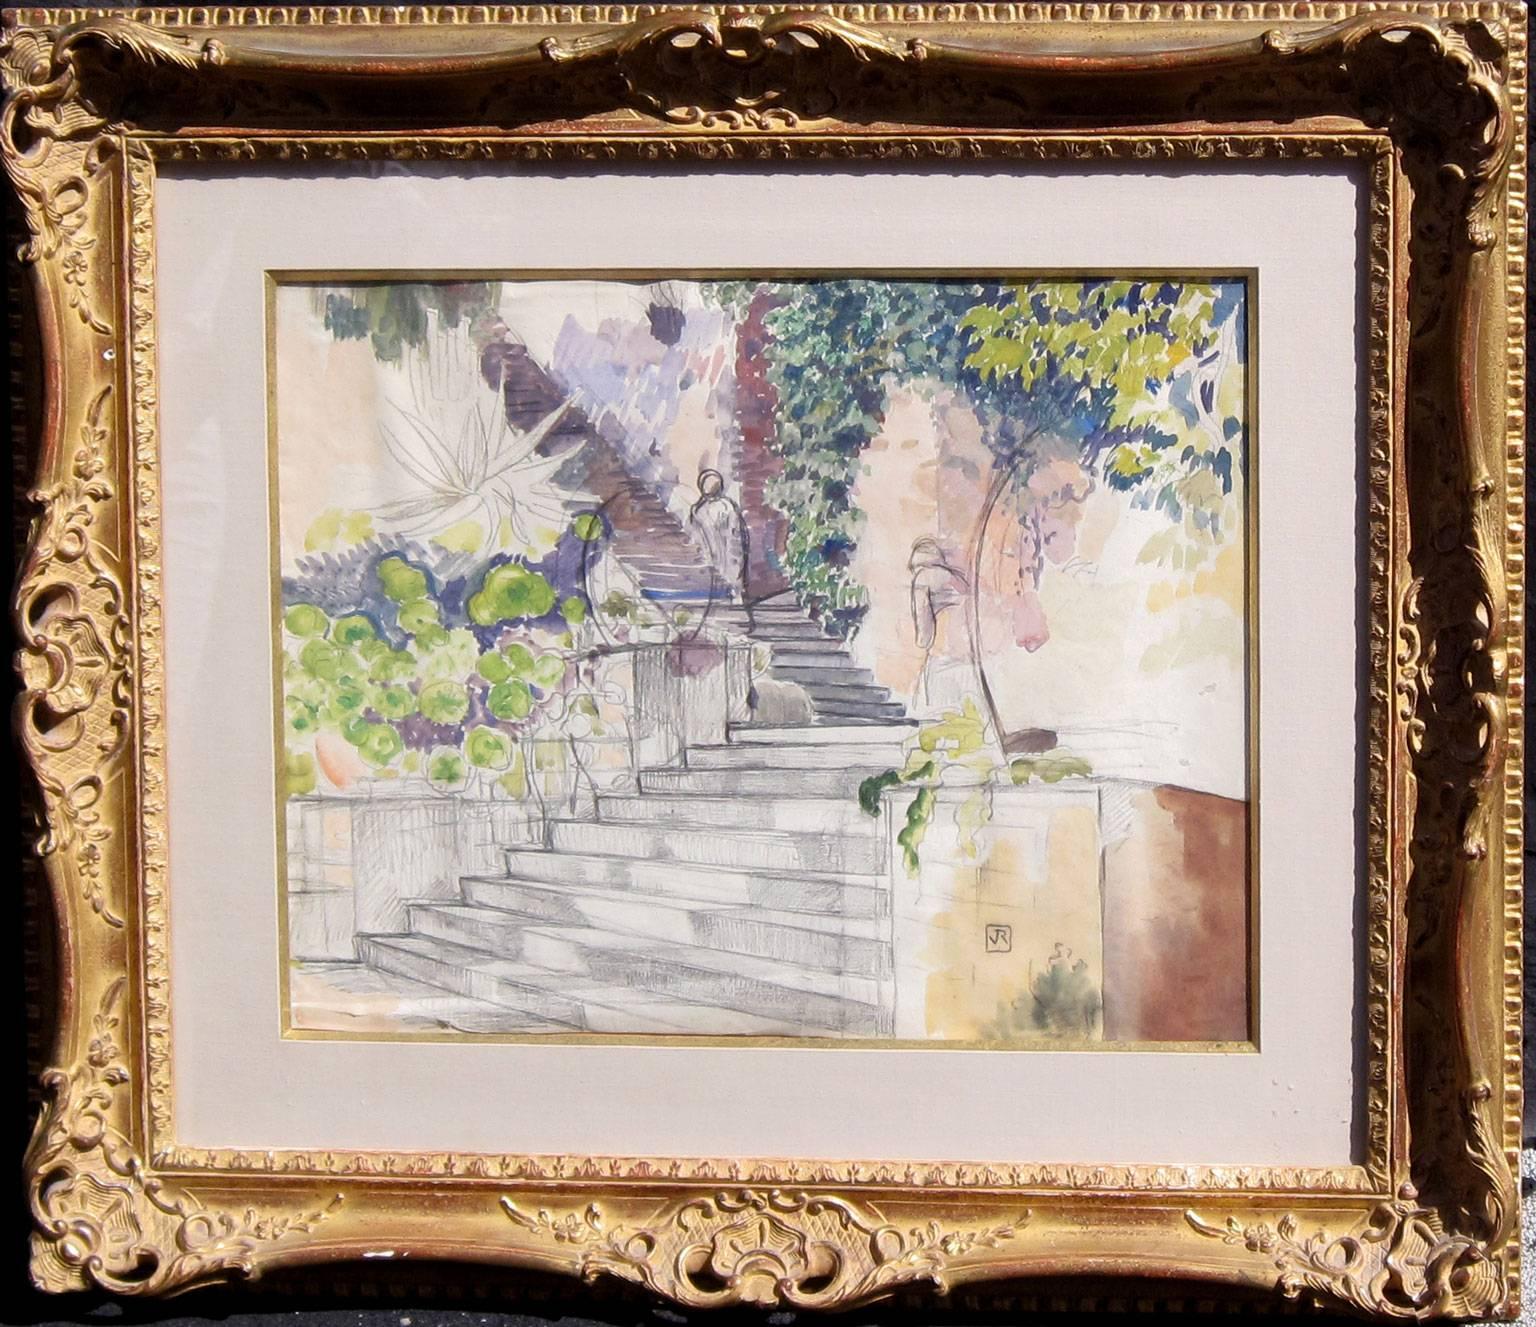 L'Escalier, Pencil and Watercolor on Paper, Théo van Rysselberghe, Belgian - Painting by Theo van Rysselberghe